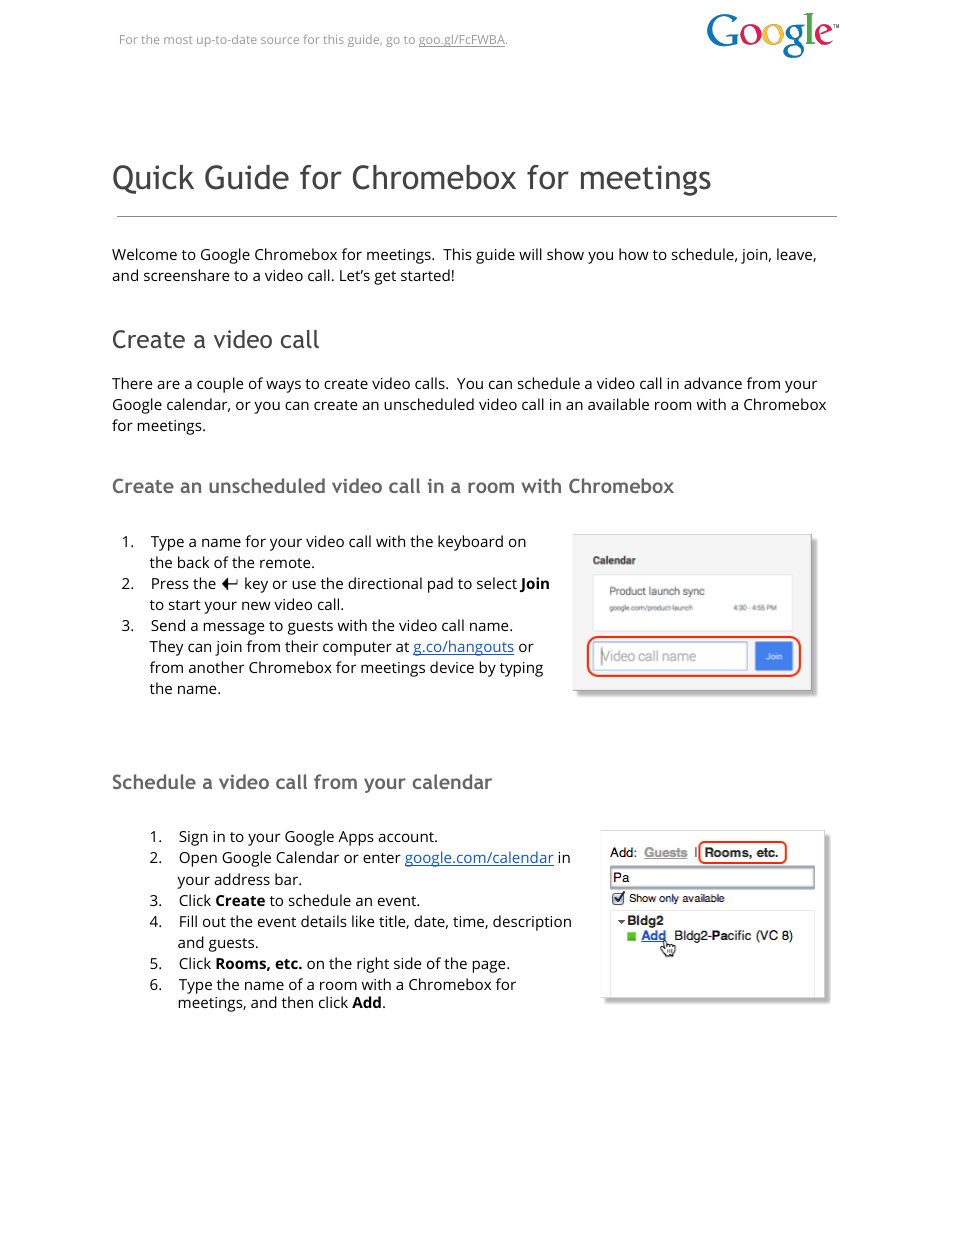 Chromebox for meetings Quick Guide